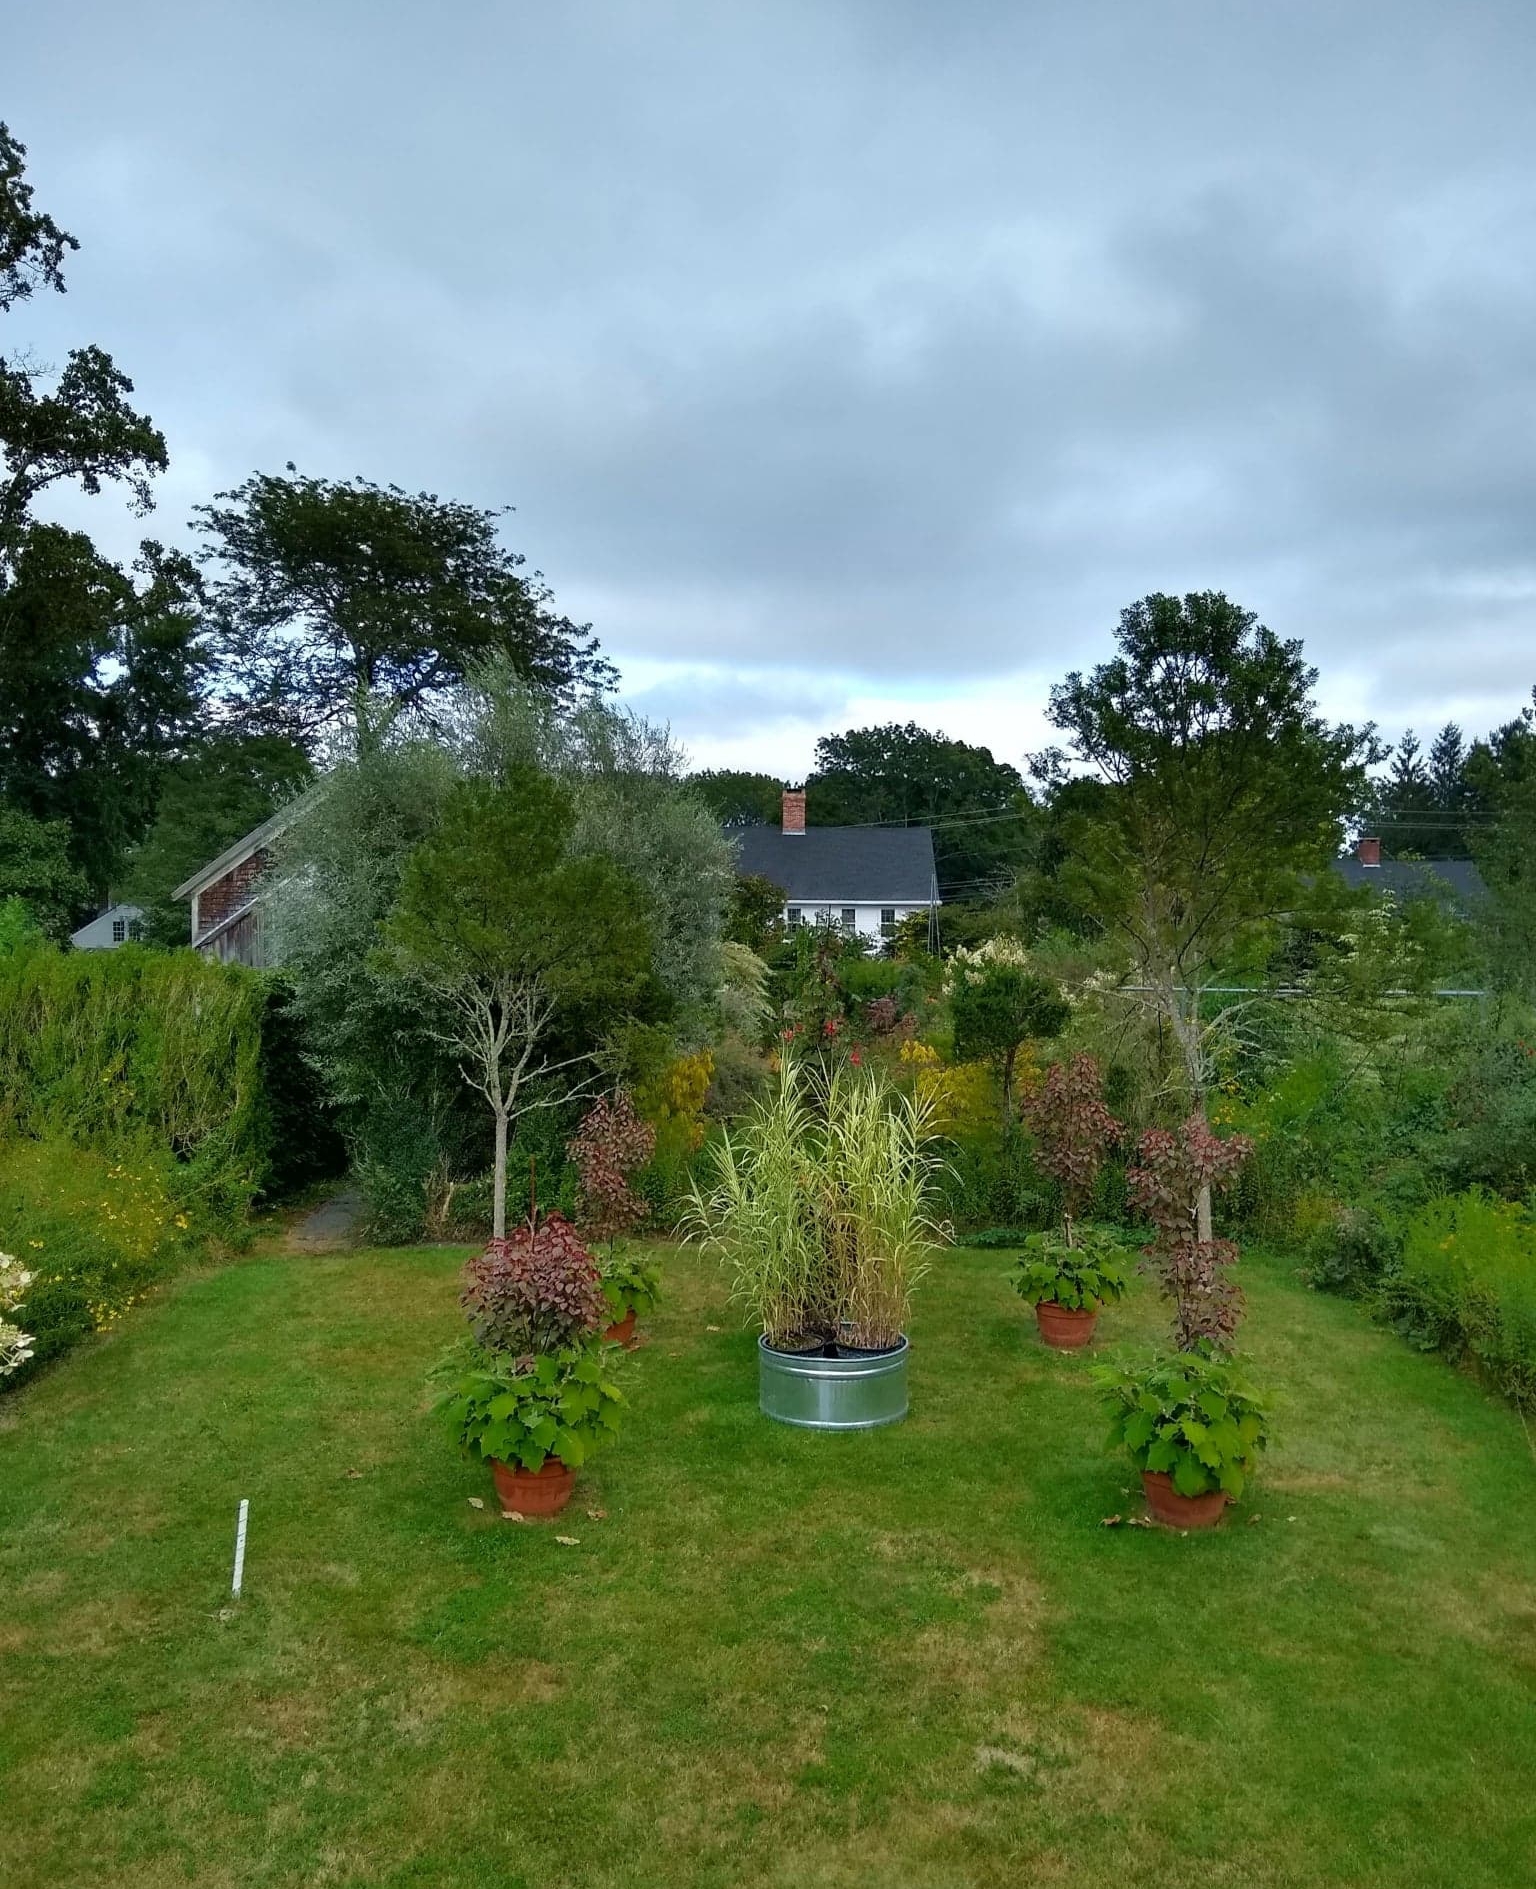 Louis has been cultivating his personal garden for over two decades - it’s a true projects of a lifetime! His home/studio/garden is located in Hopkinton, RI.